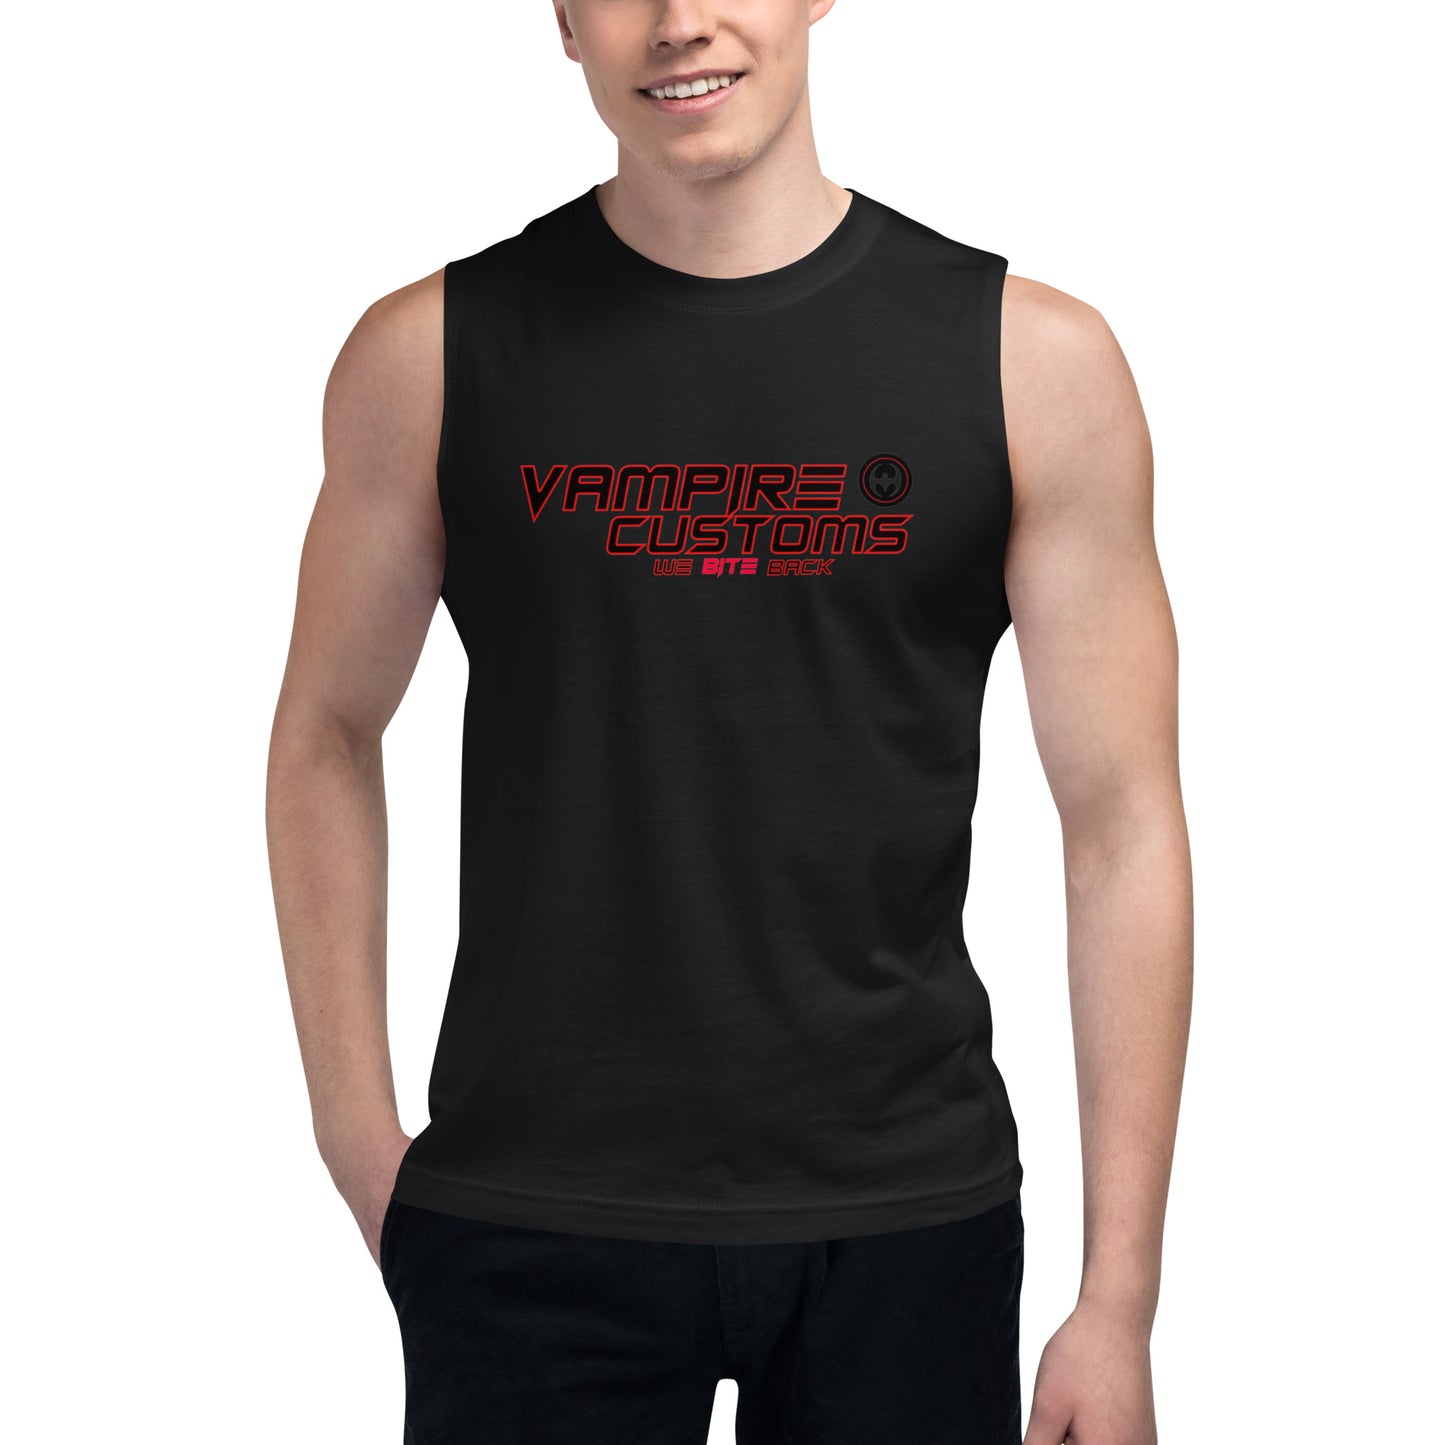 Vampire Customs Logo Muscle Shirt Tank Top Multiple Sizes and Colors